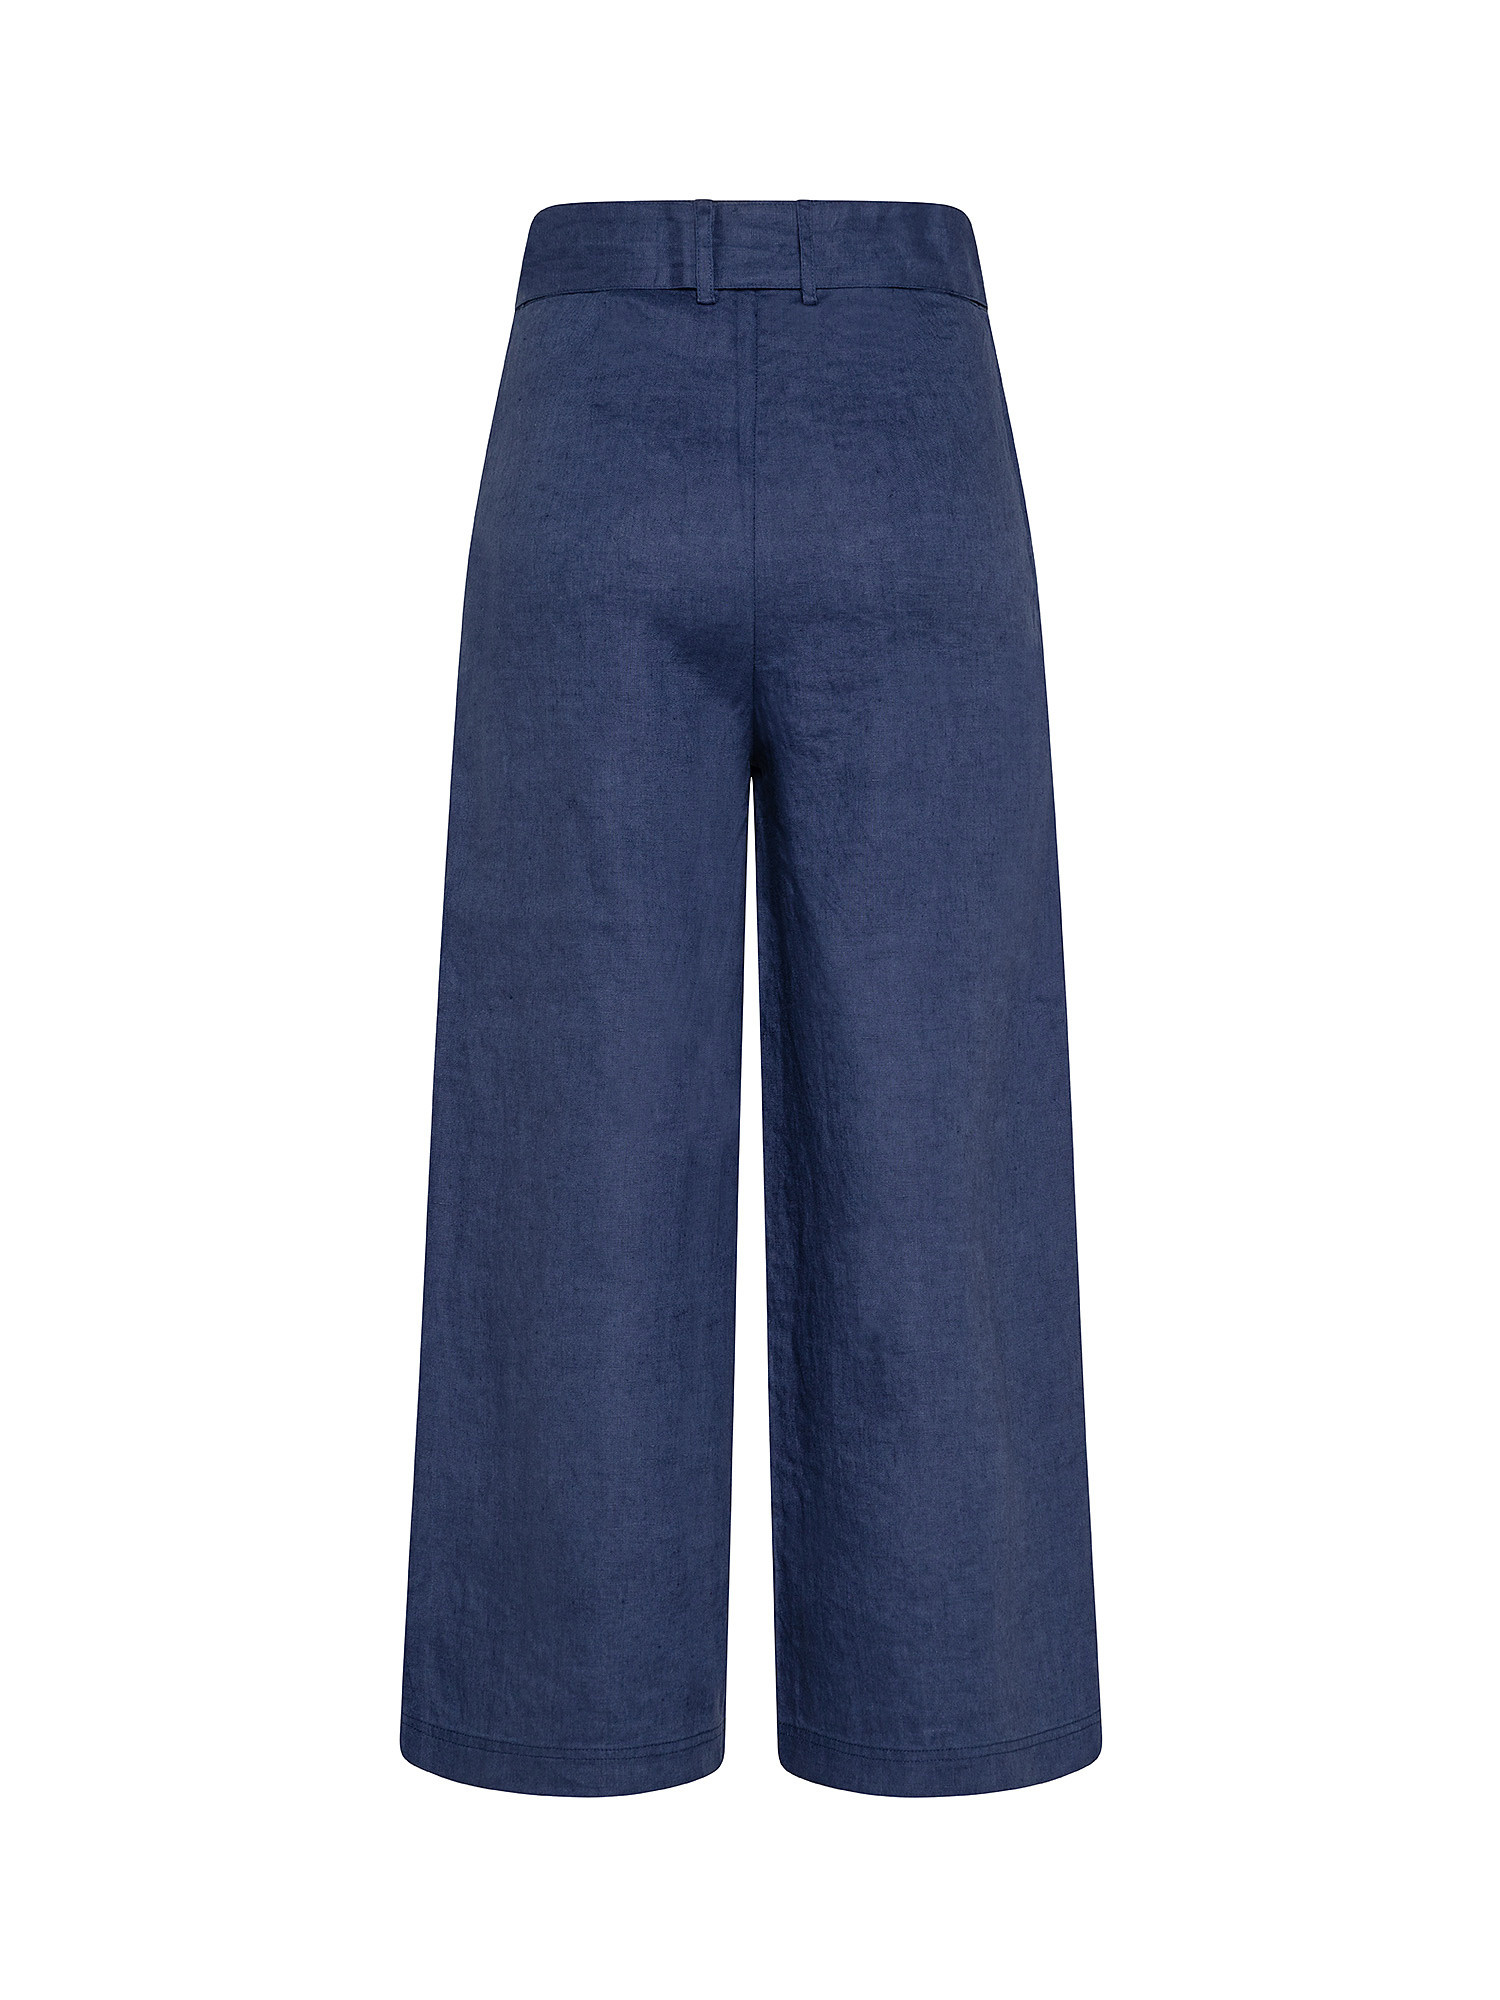 Pure linen 3/4 trousers with belt, Blue, large image number 1